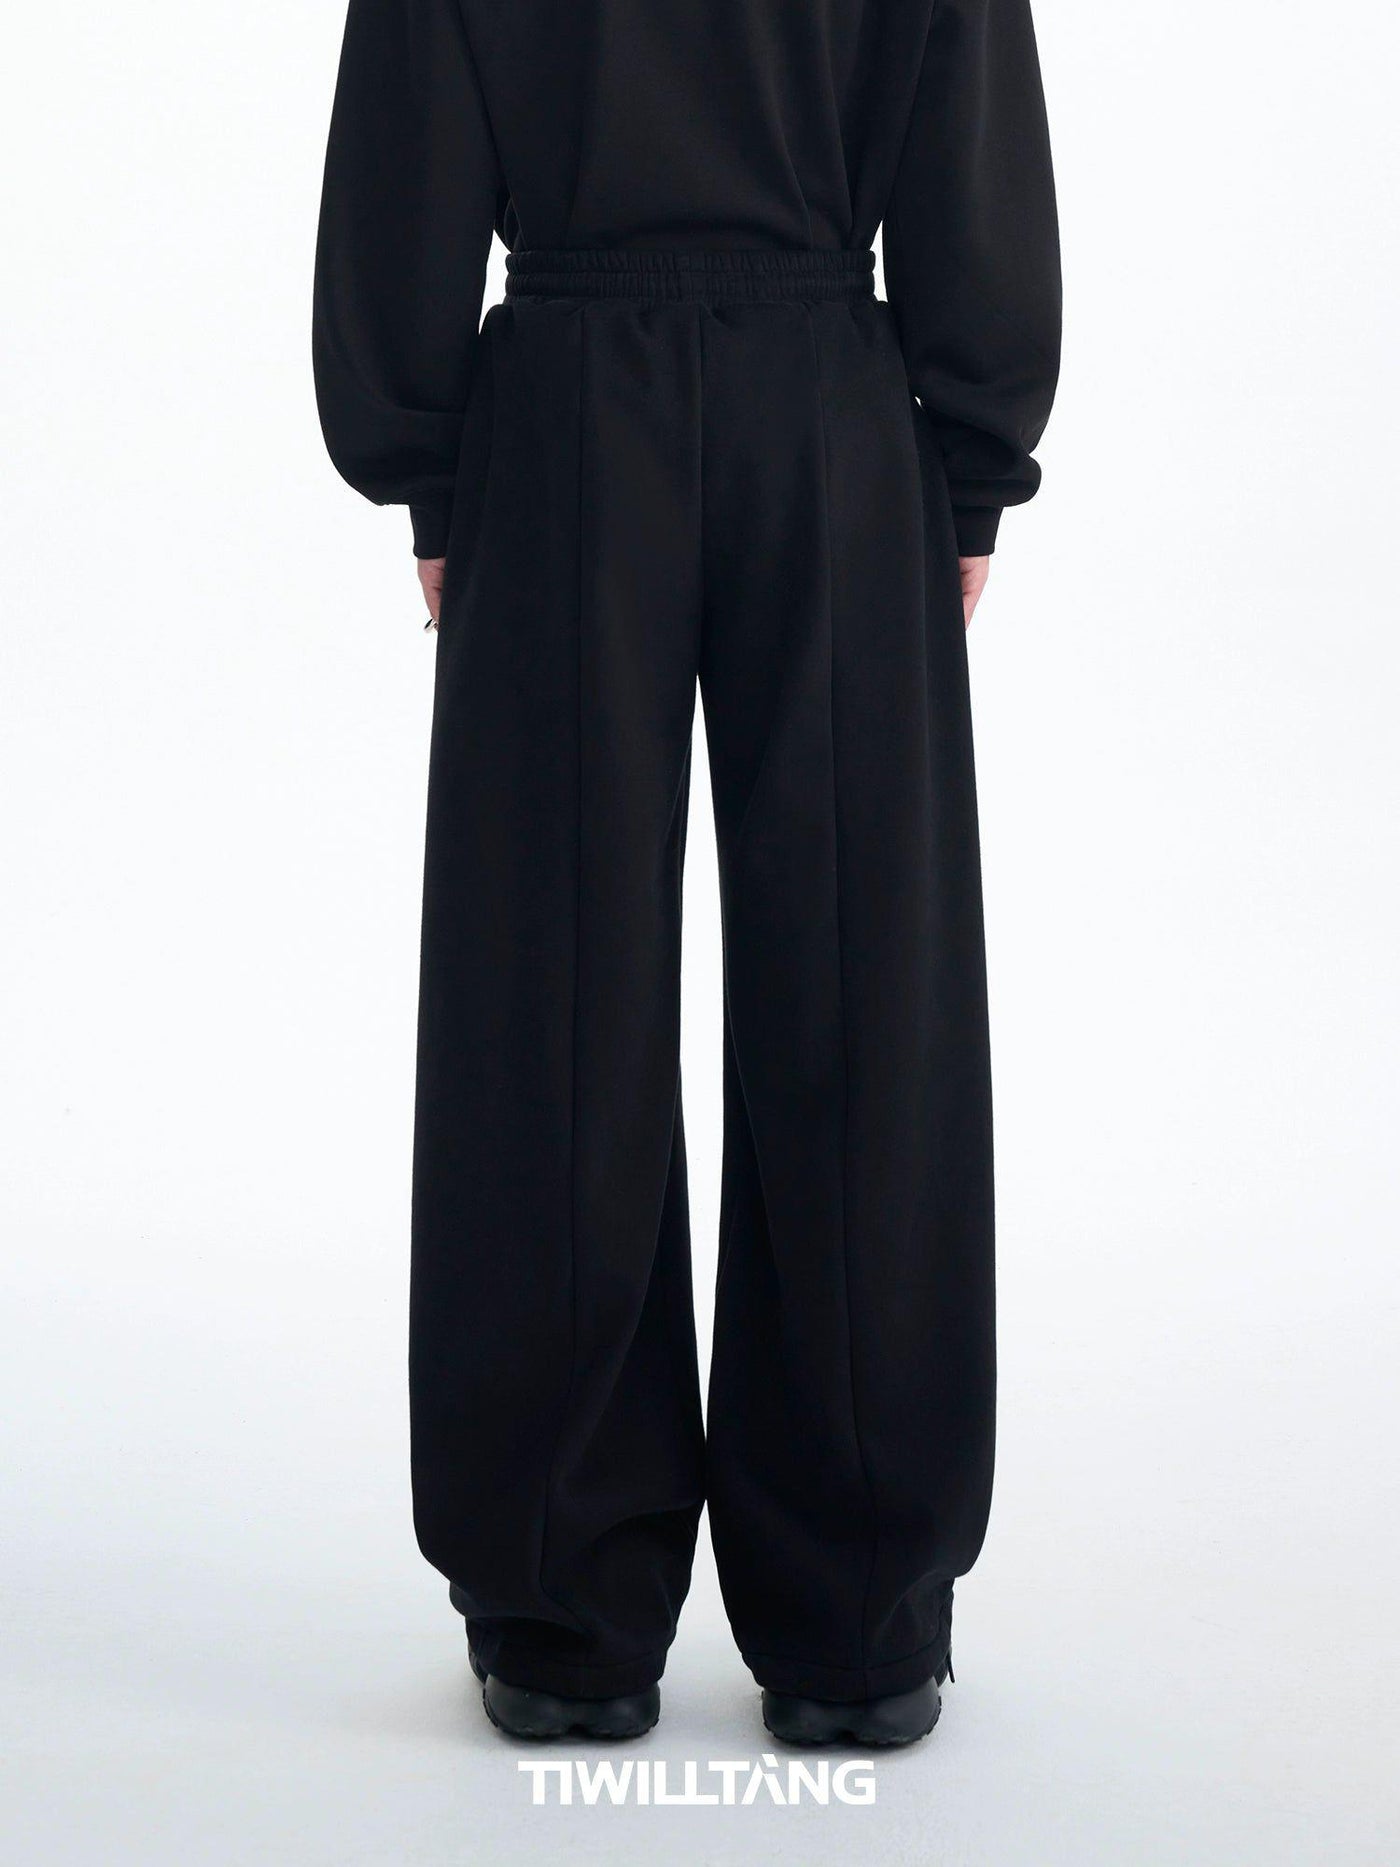 Dual Front Pocket Spliced Sweatpants Korean Street Fashion Pants By TIWILLTANG Shop Online at OH Vault